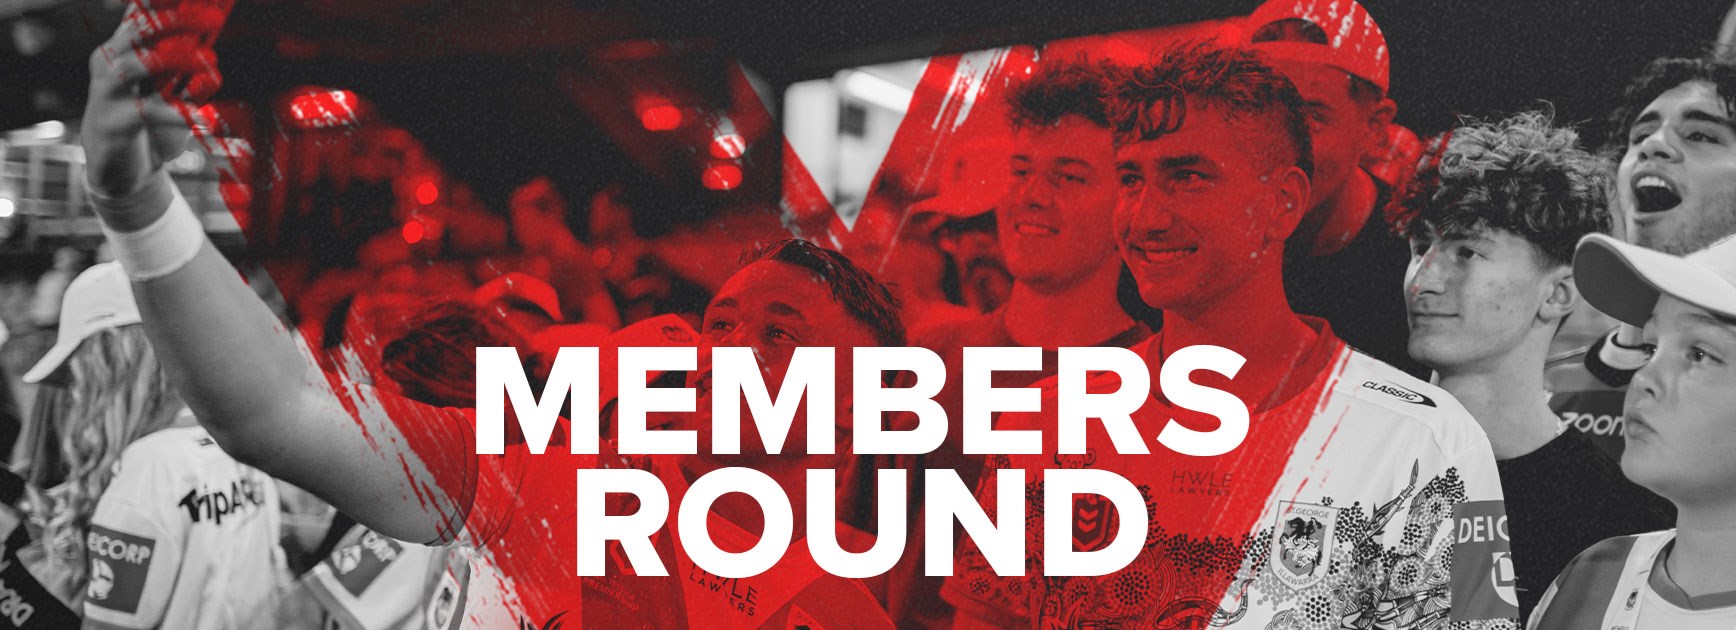 Round 15 is Members Round!